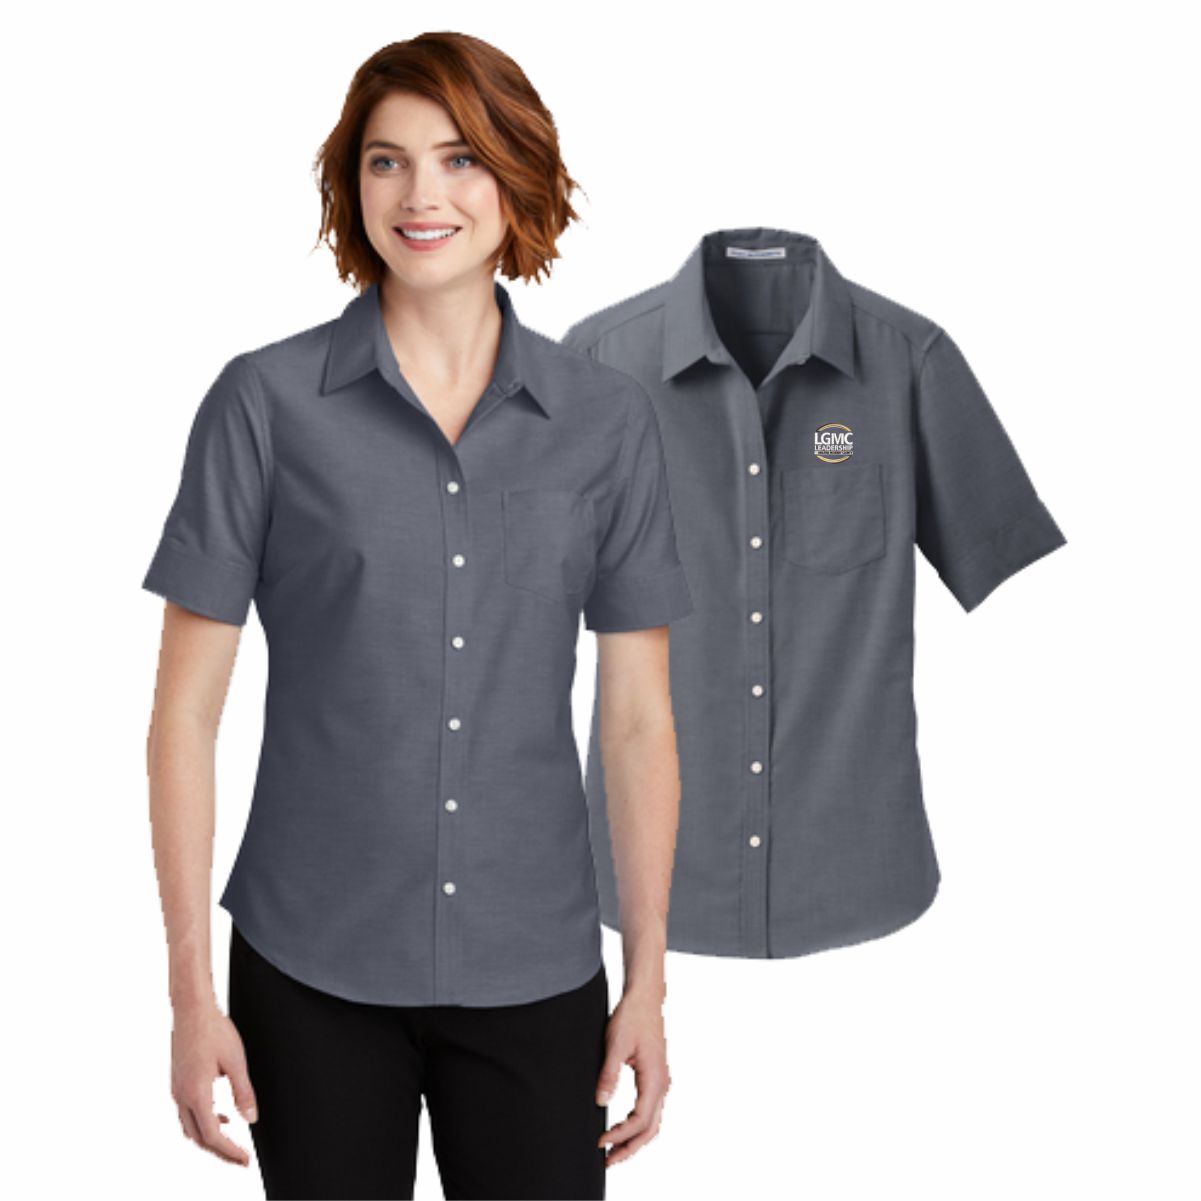 Leadership Greater McHenry County Short Sleeve Twill Shirt - Ladies ...